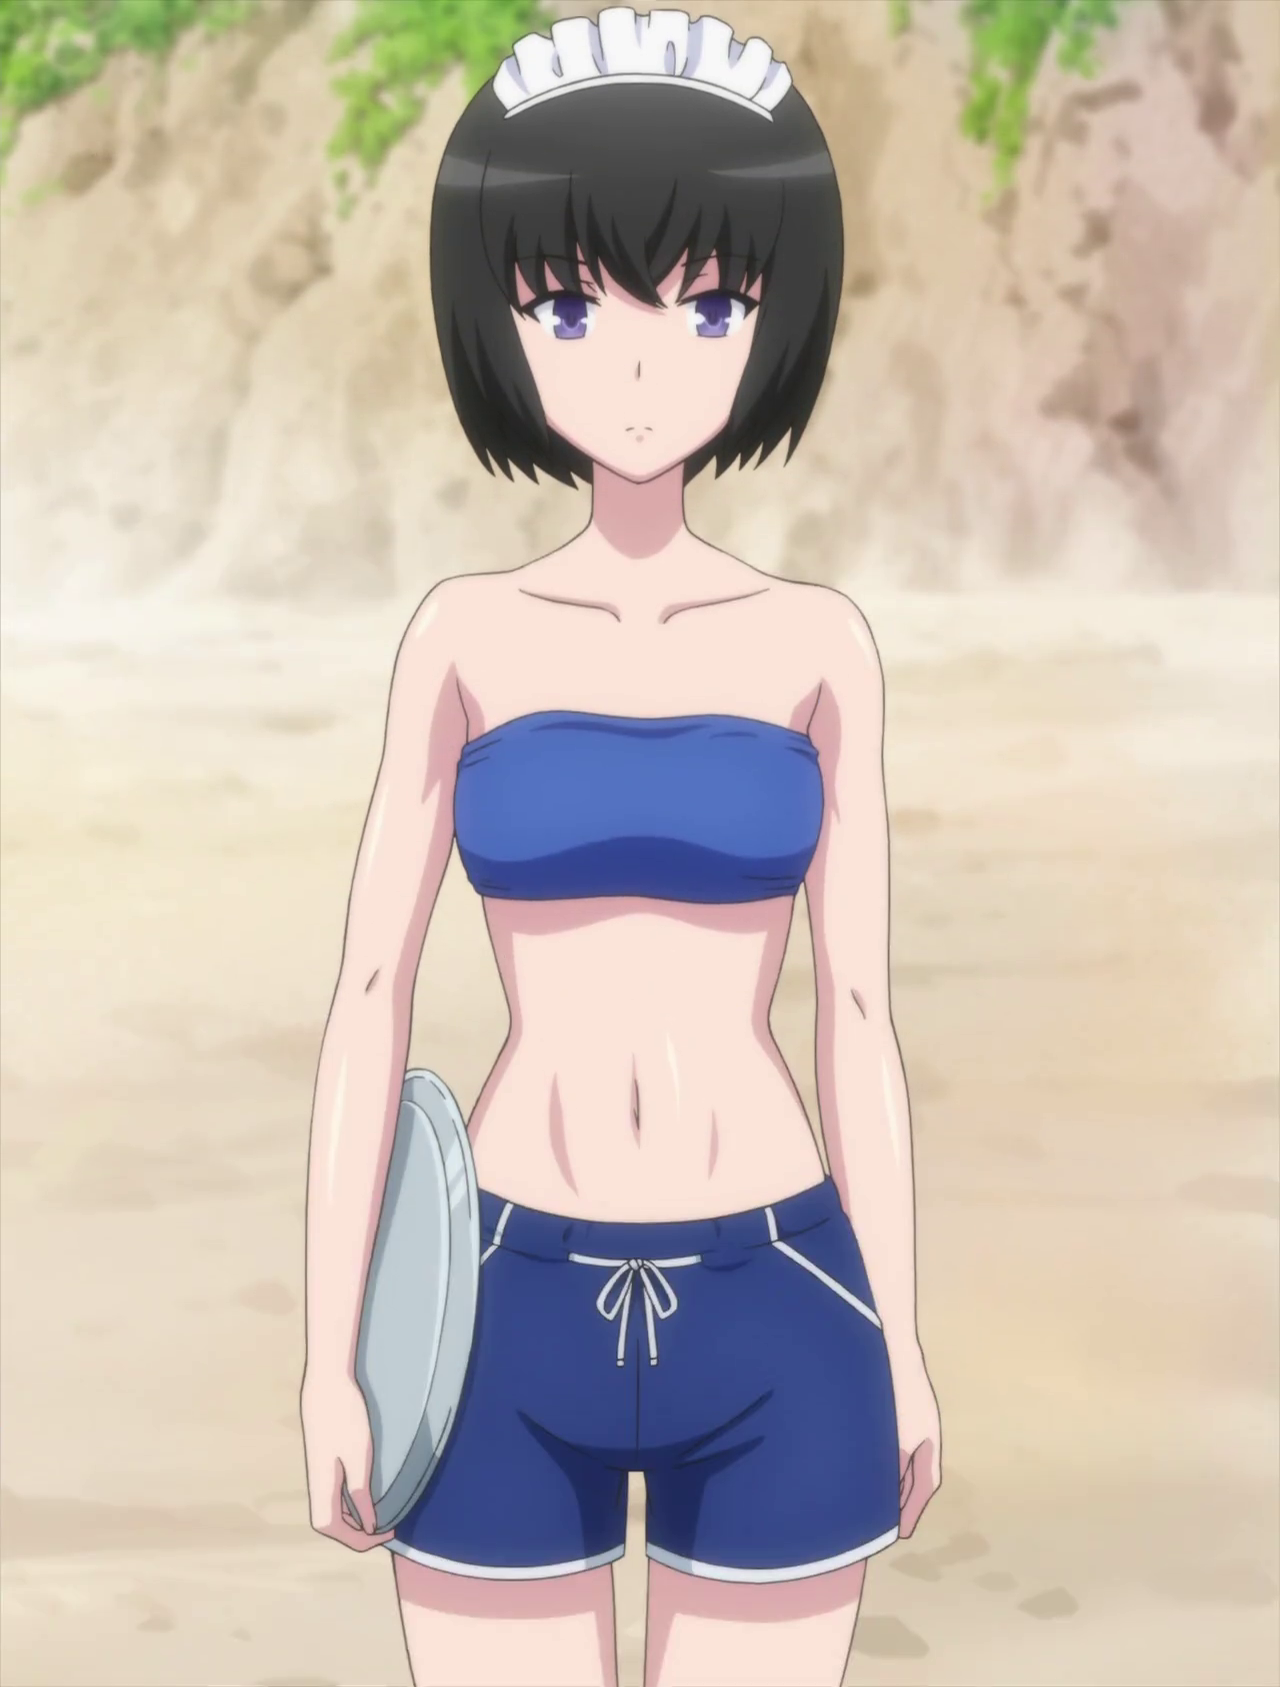 HardDK 18+ on X: Anime:-Isekai wa Smartphone to Tomo ni.  2/Characters:-Lapis,Galen/Description:-Lapis b*** is well trained Galen  knows very well after the fight was over Lapis took Galen to s private room  where